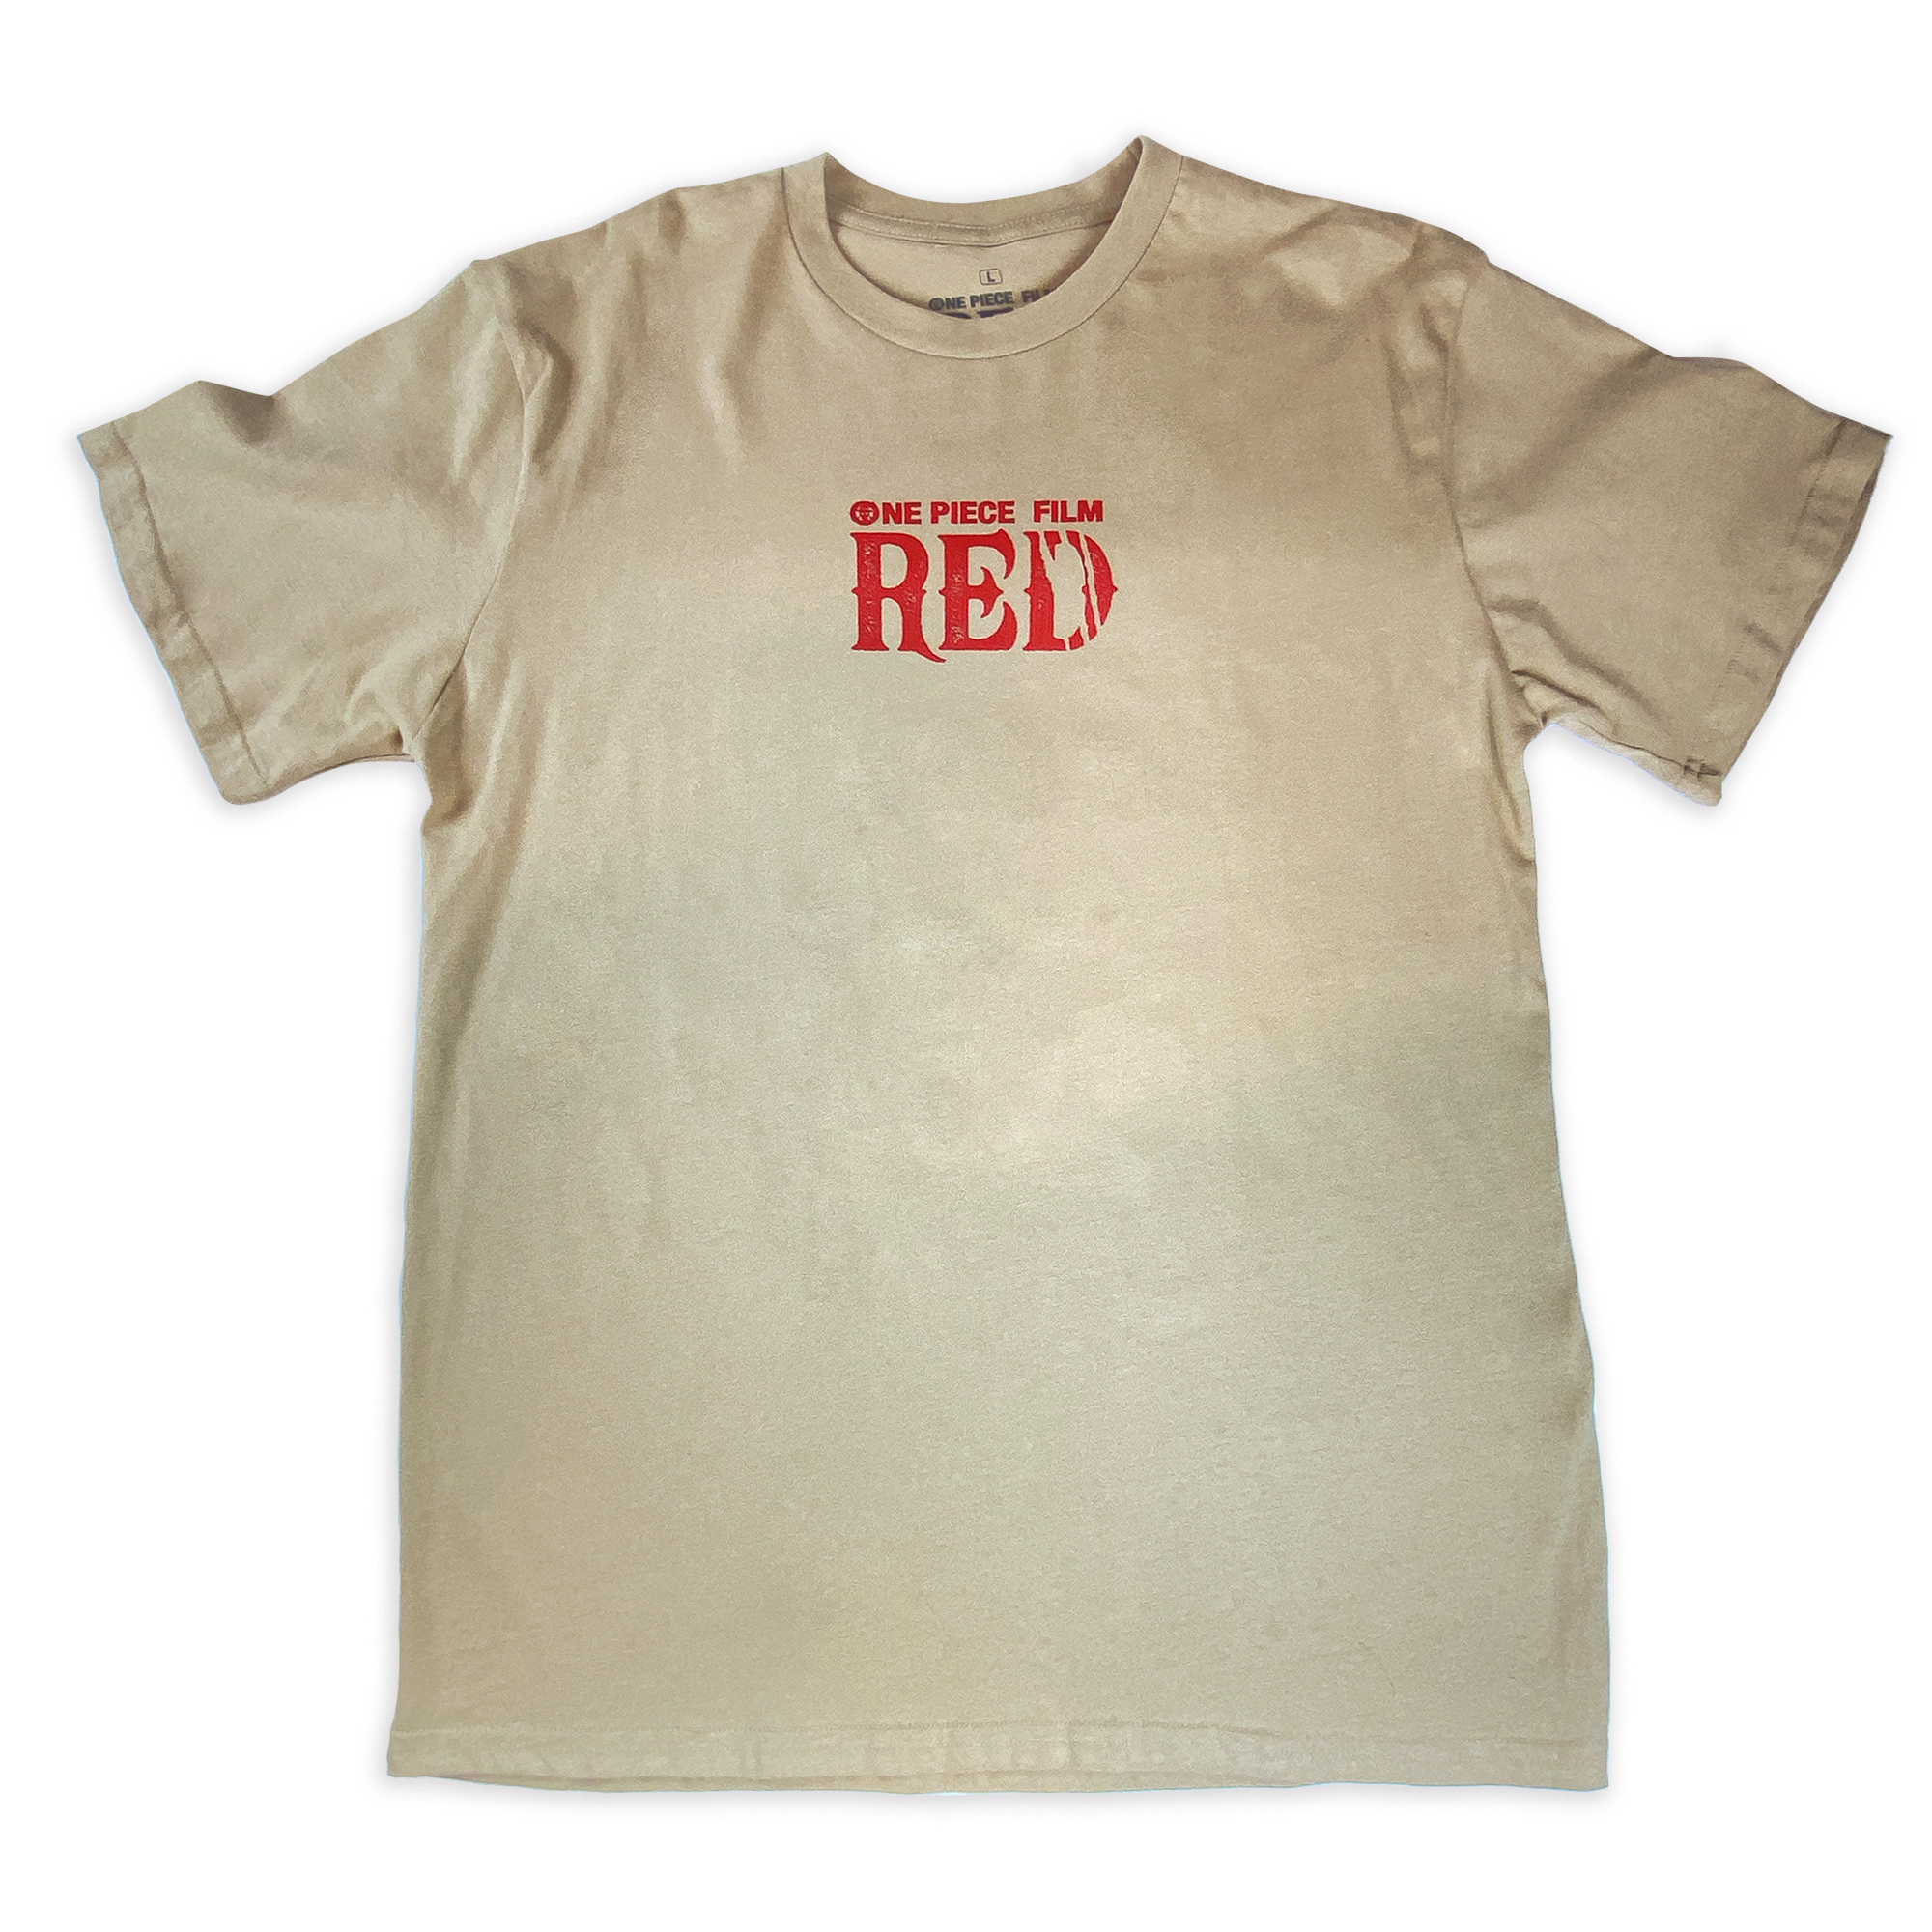 One Piece Film: Red - Sunny T-Shirt  - Crunchyroll Exclusive! image count 1